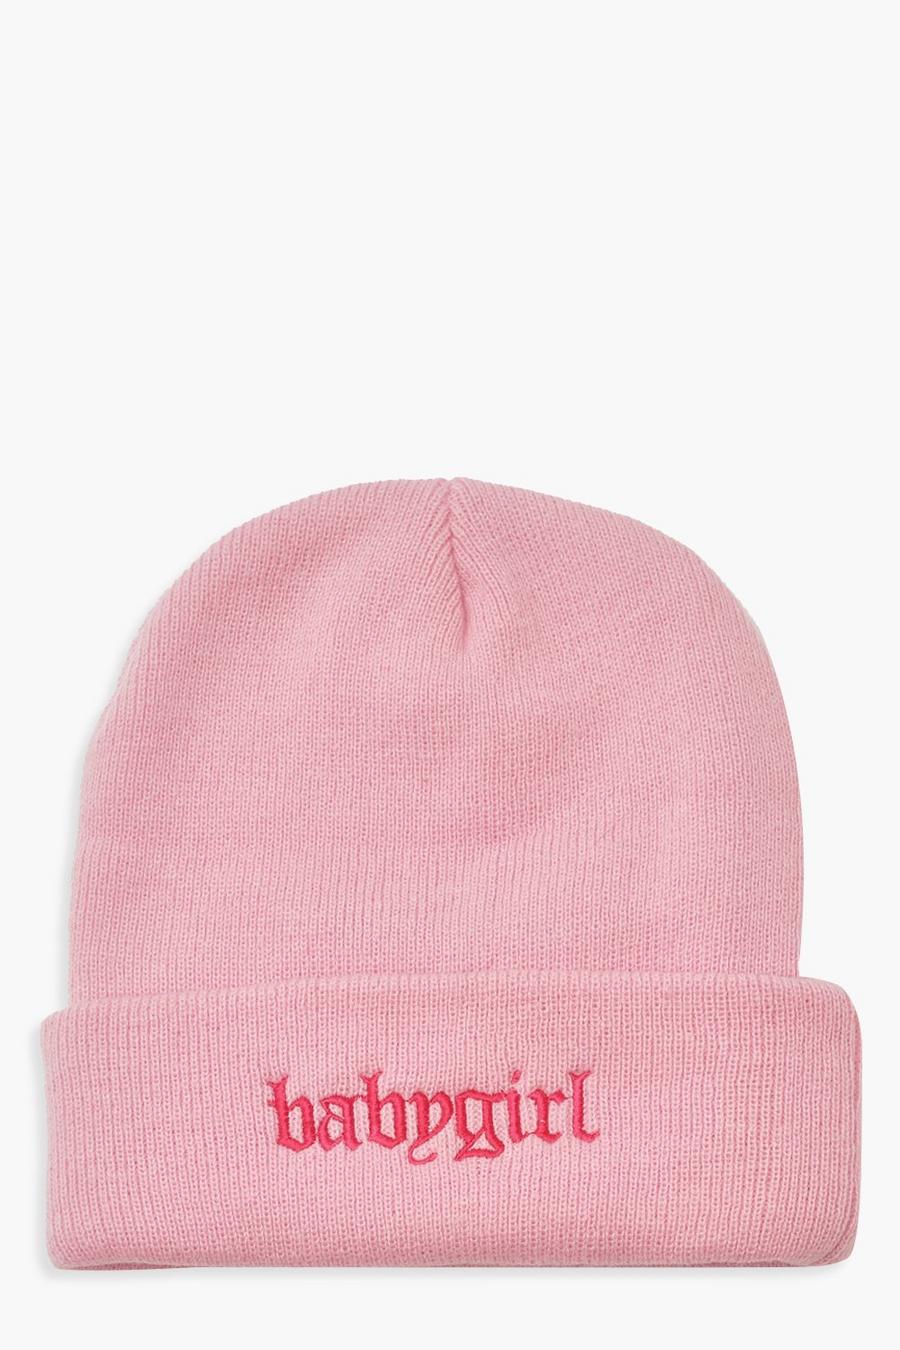 Pink Babygirl Beanie image number 1